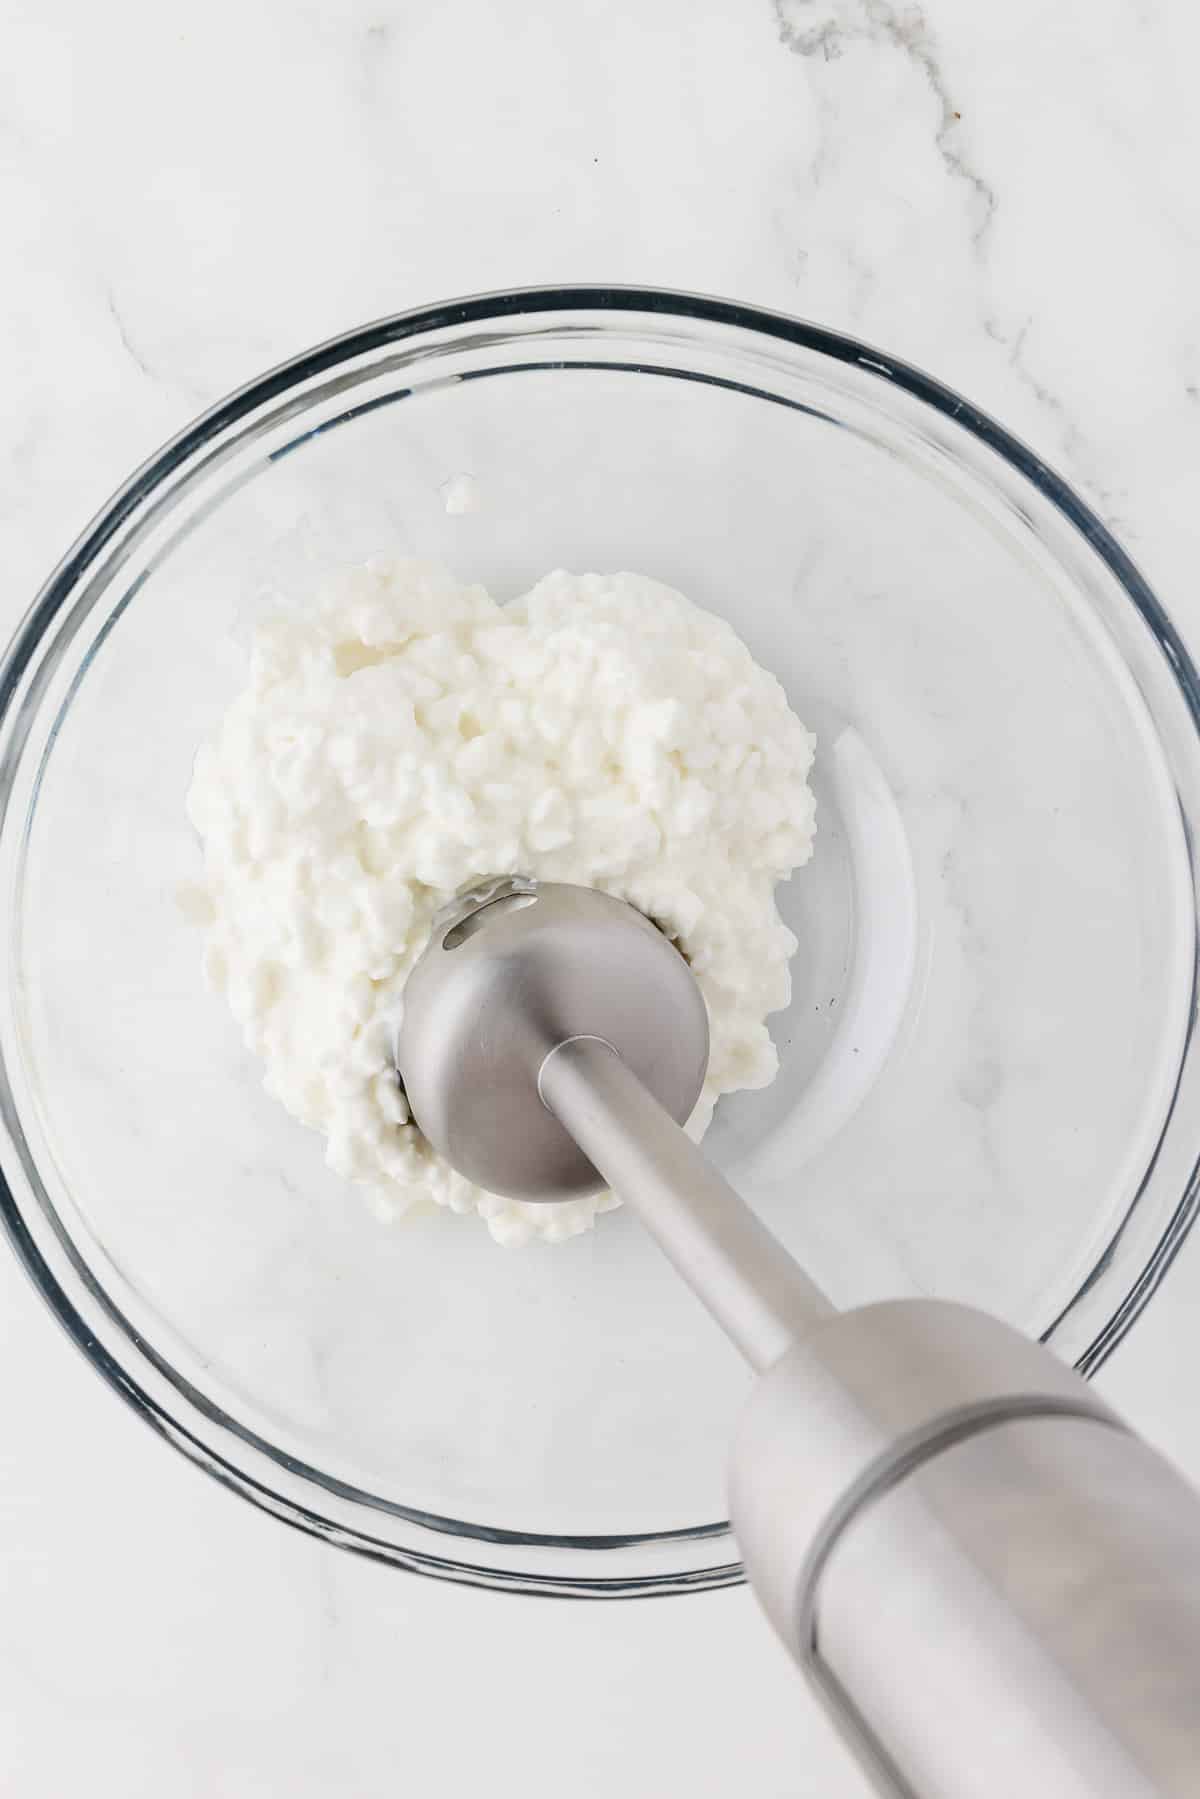 cottage cheese in a glass bowl being ground up by an immersion blender.